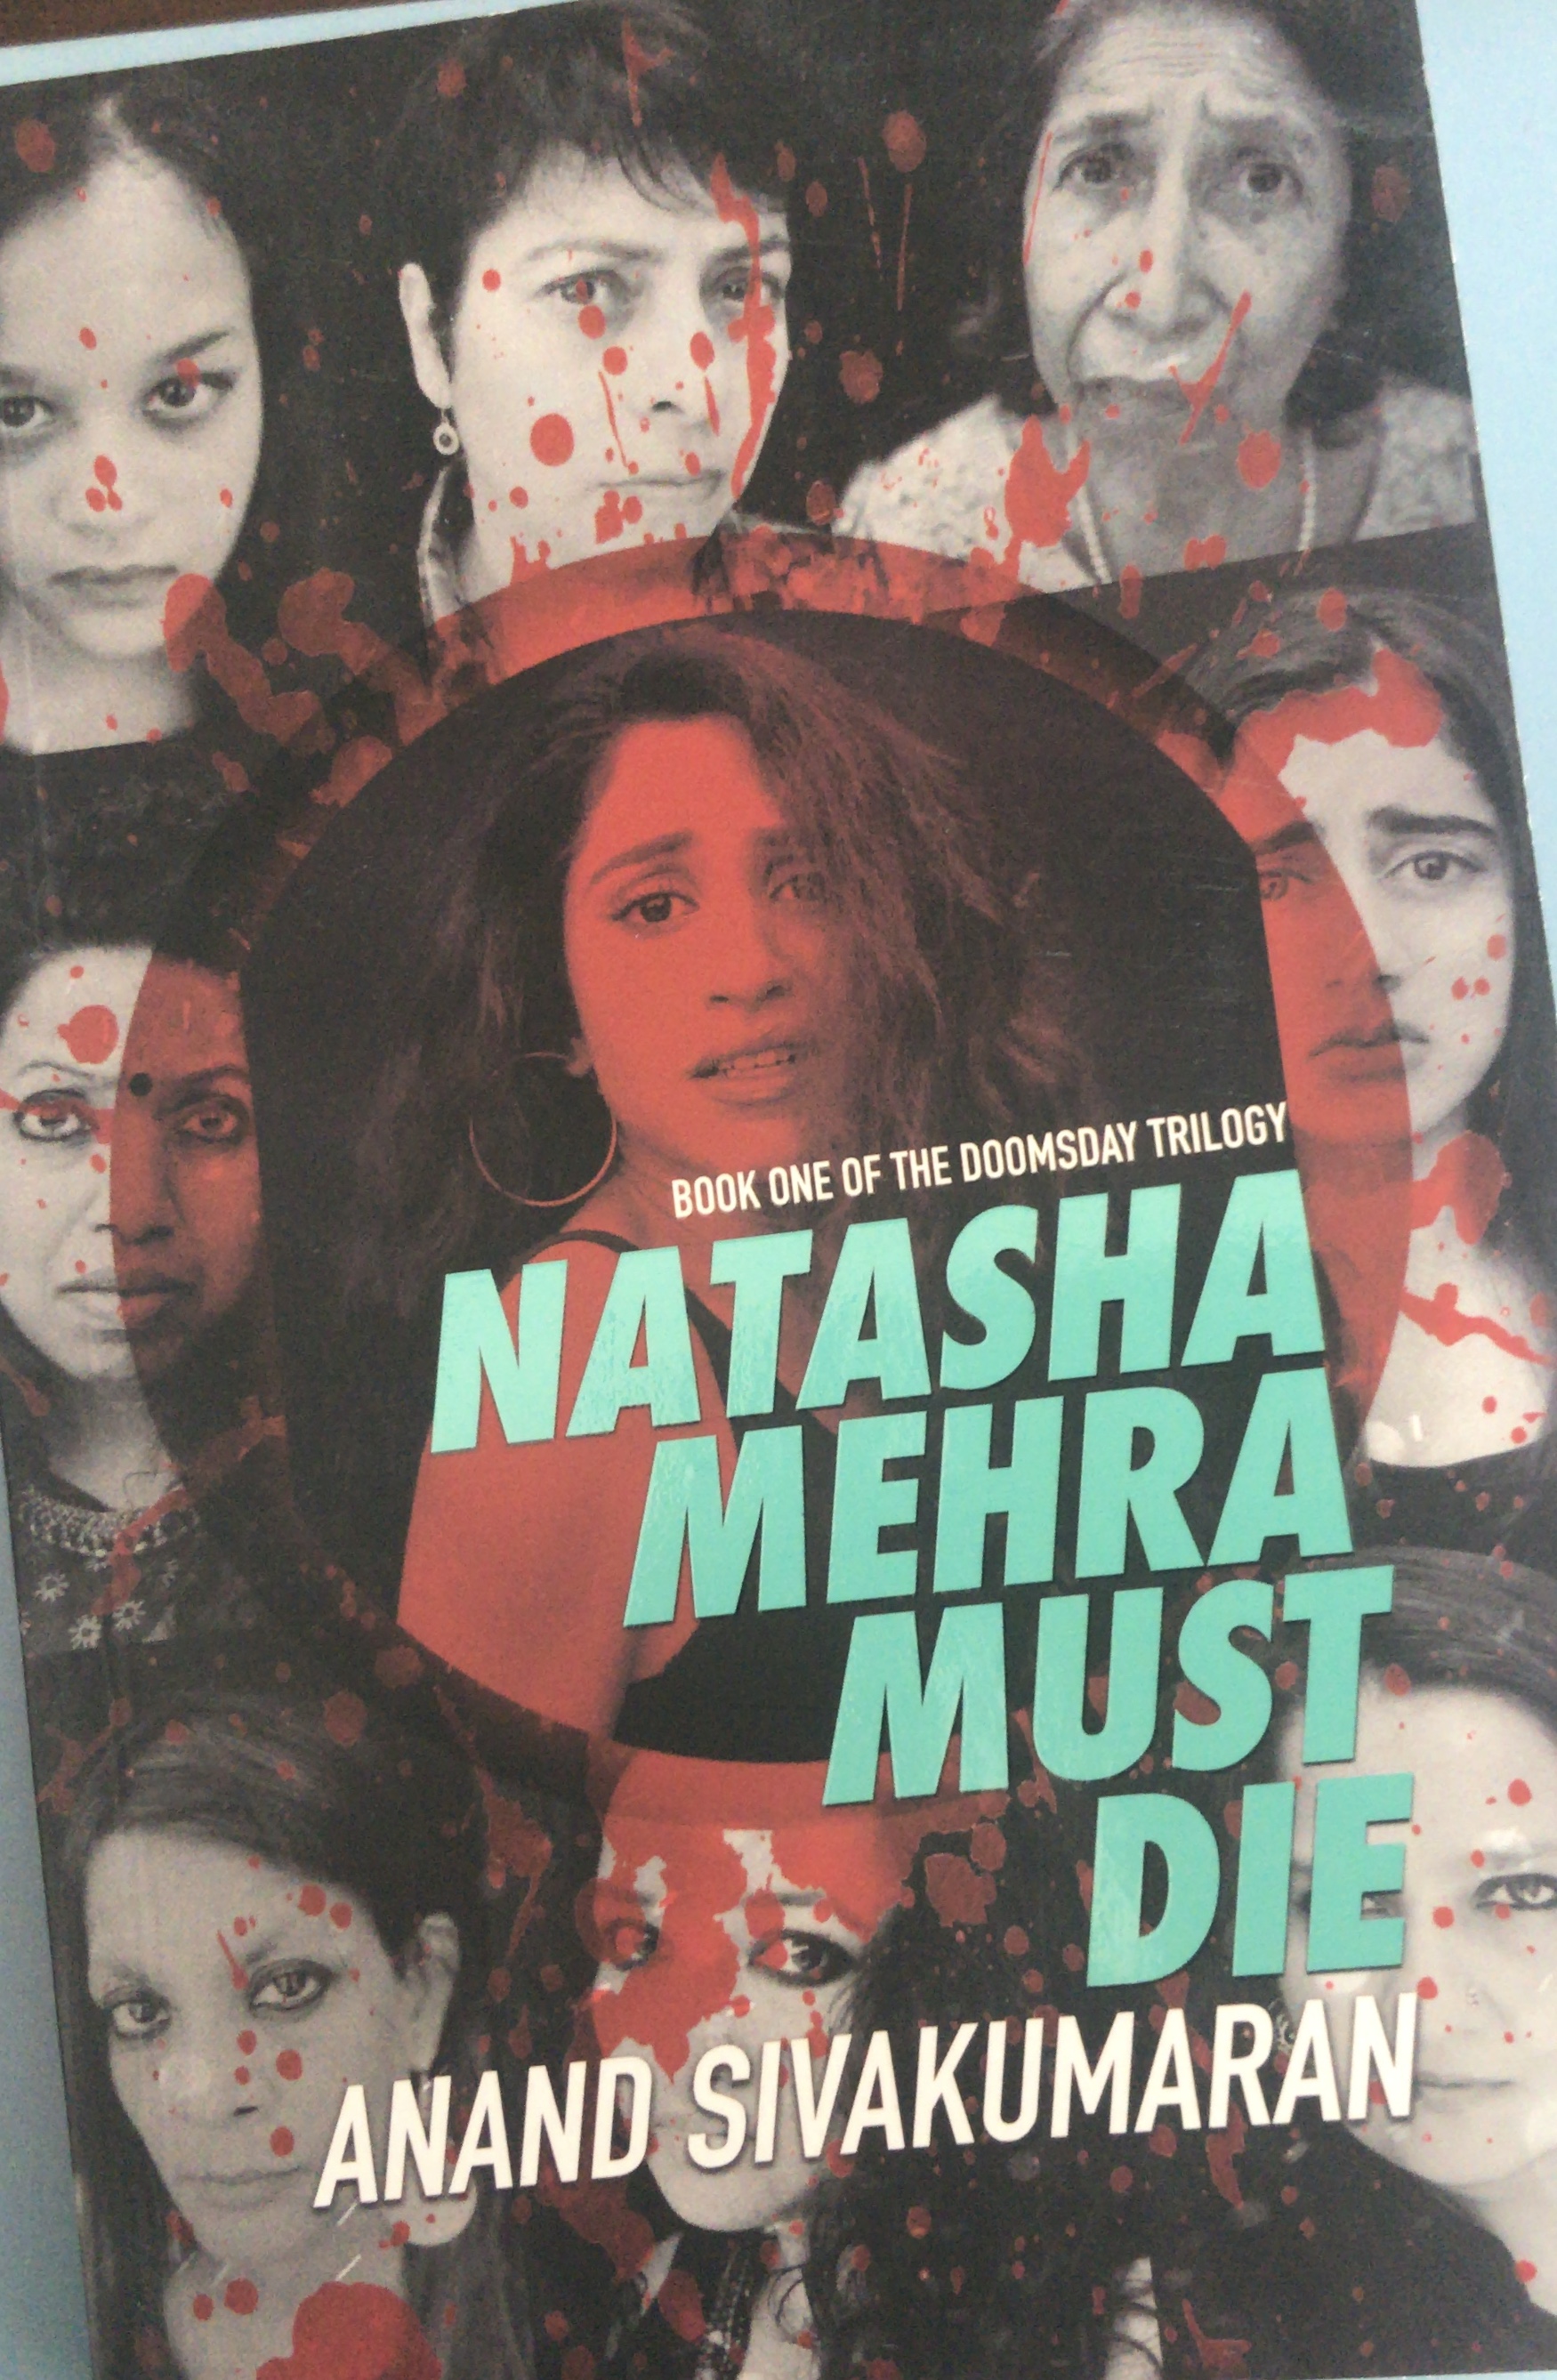 You are currently viewing Natasha Mehra Must Die- a racy thriller by Anand Sivakumaran